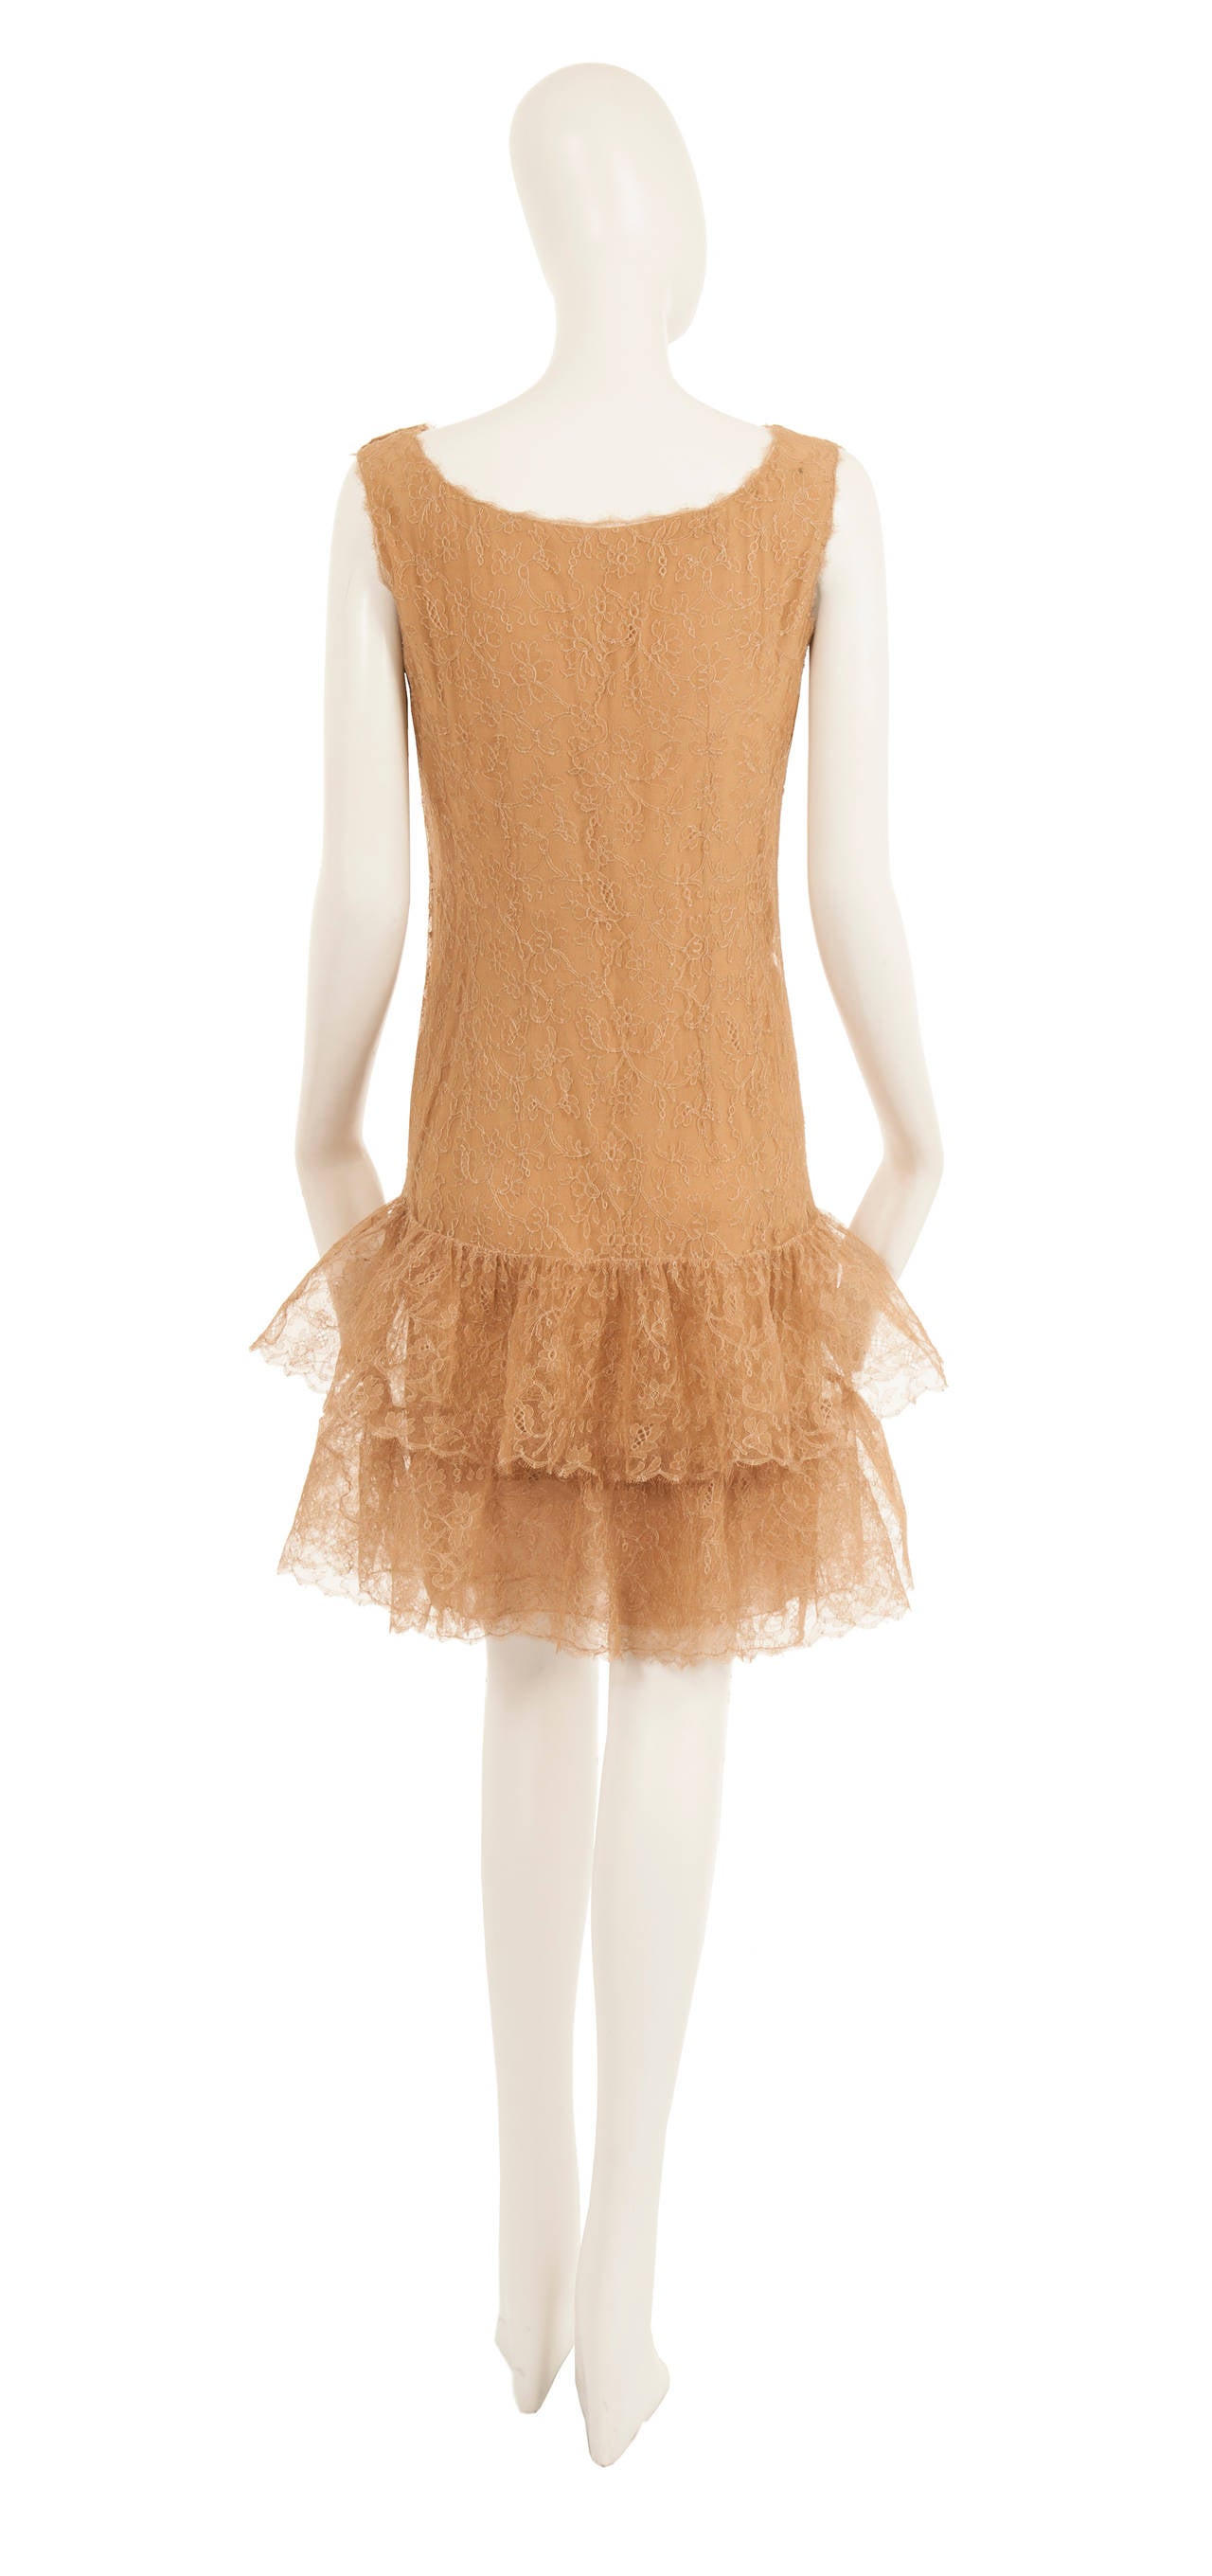 Balenciaga haute couture caramel lace dress, spring summer 1964 In Excellent Condition For Sale In London, GB